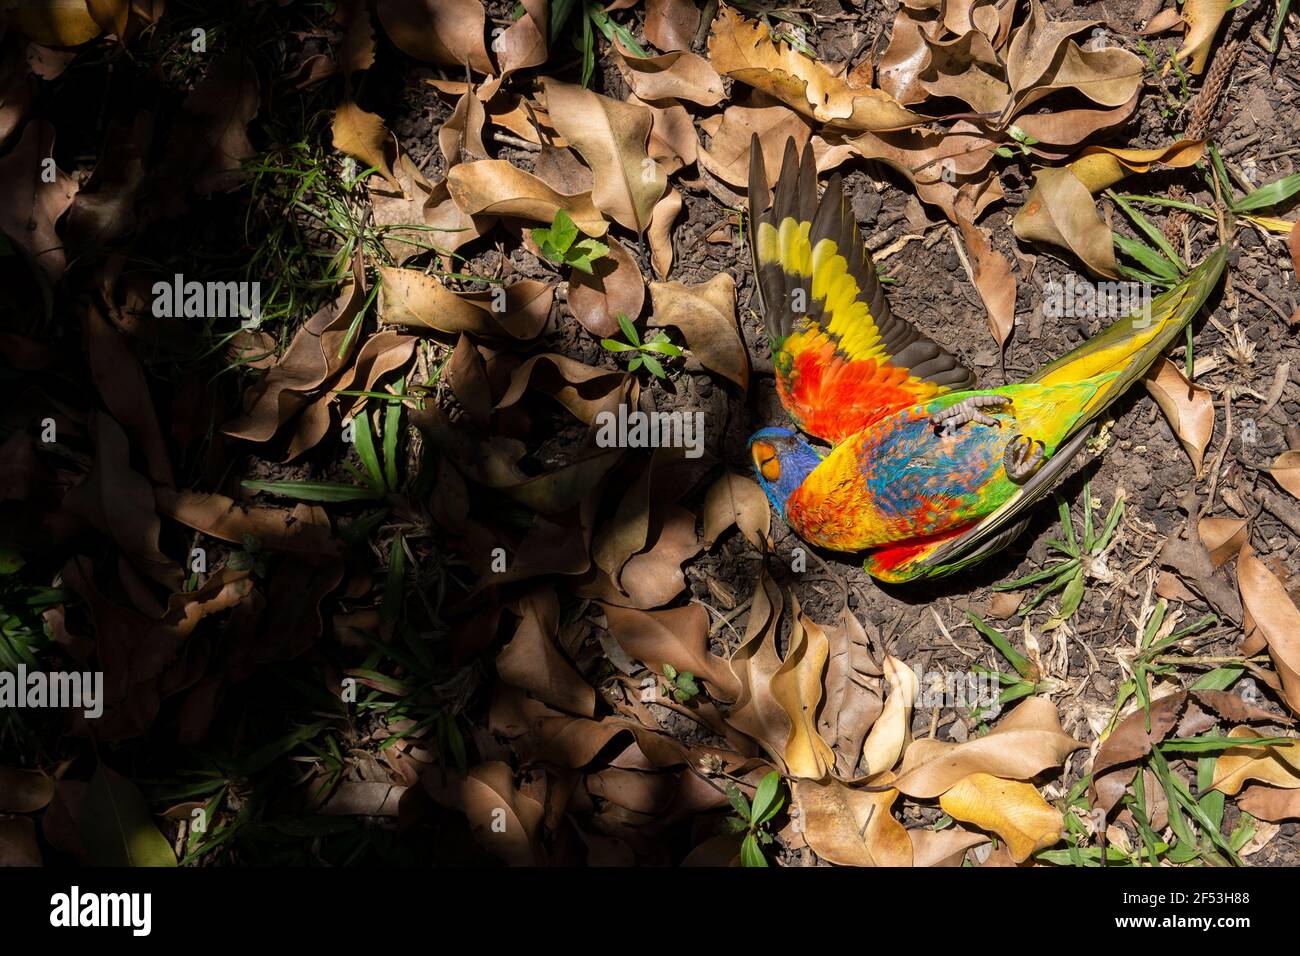 An Australian rainbow lorikeet, trichoglossus moluccanus, a native parrot, killed by a hawk, showing the beautiful plumage which give them their name. Stock Photo